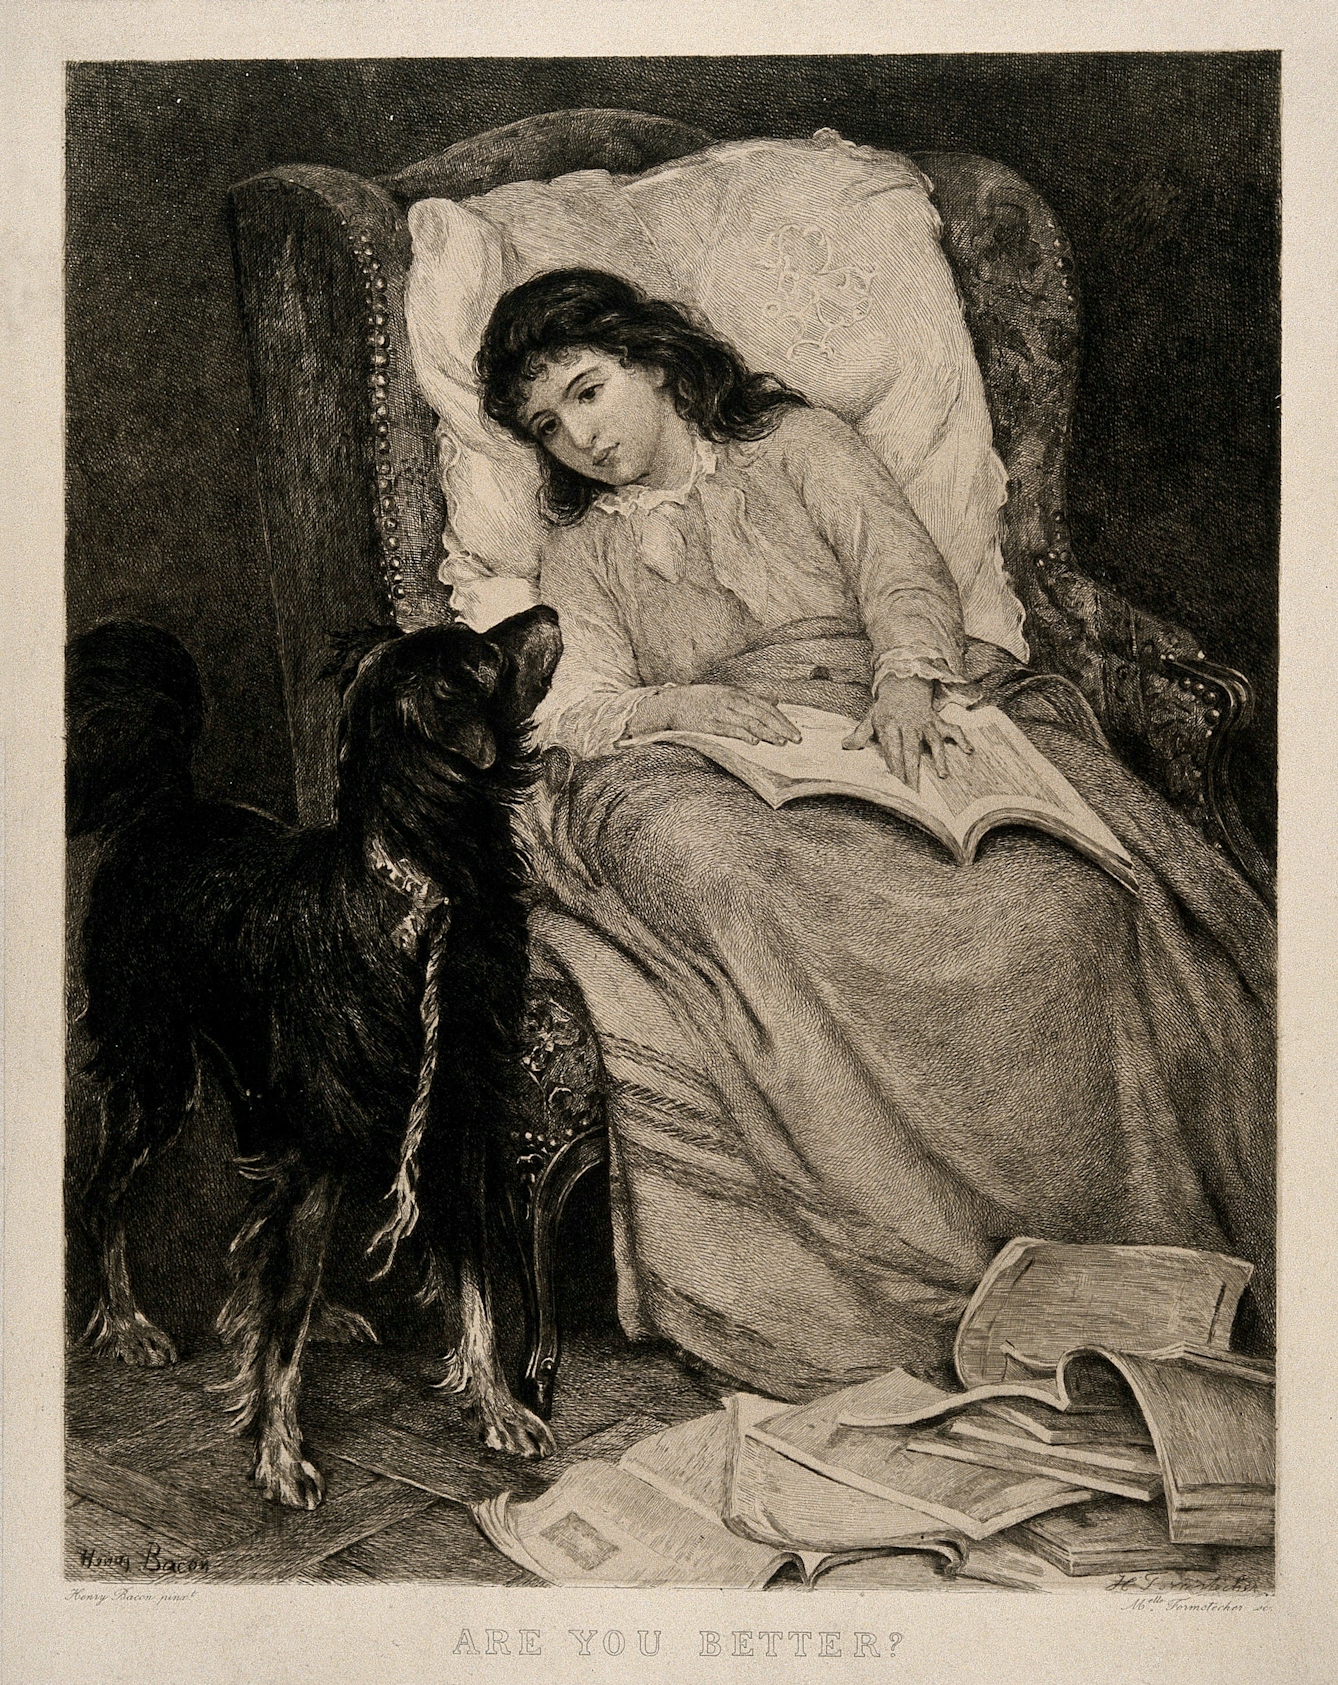 Black and white reproduction of a painting showing a young girl seated in an armchair with a dog beside her.